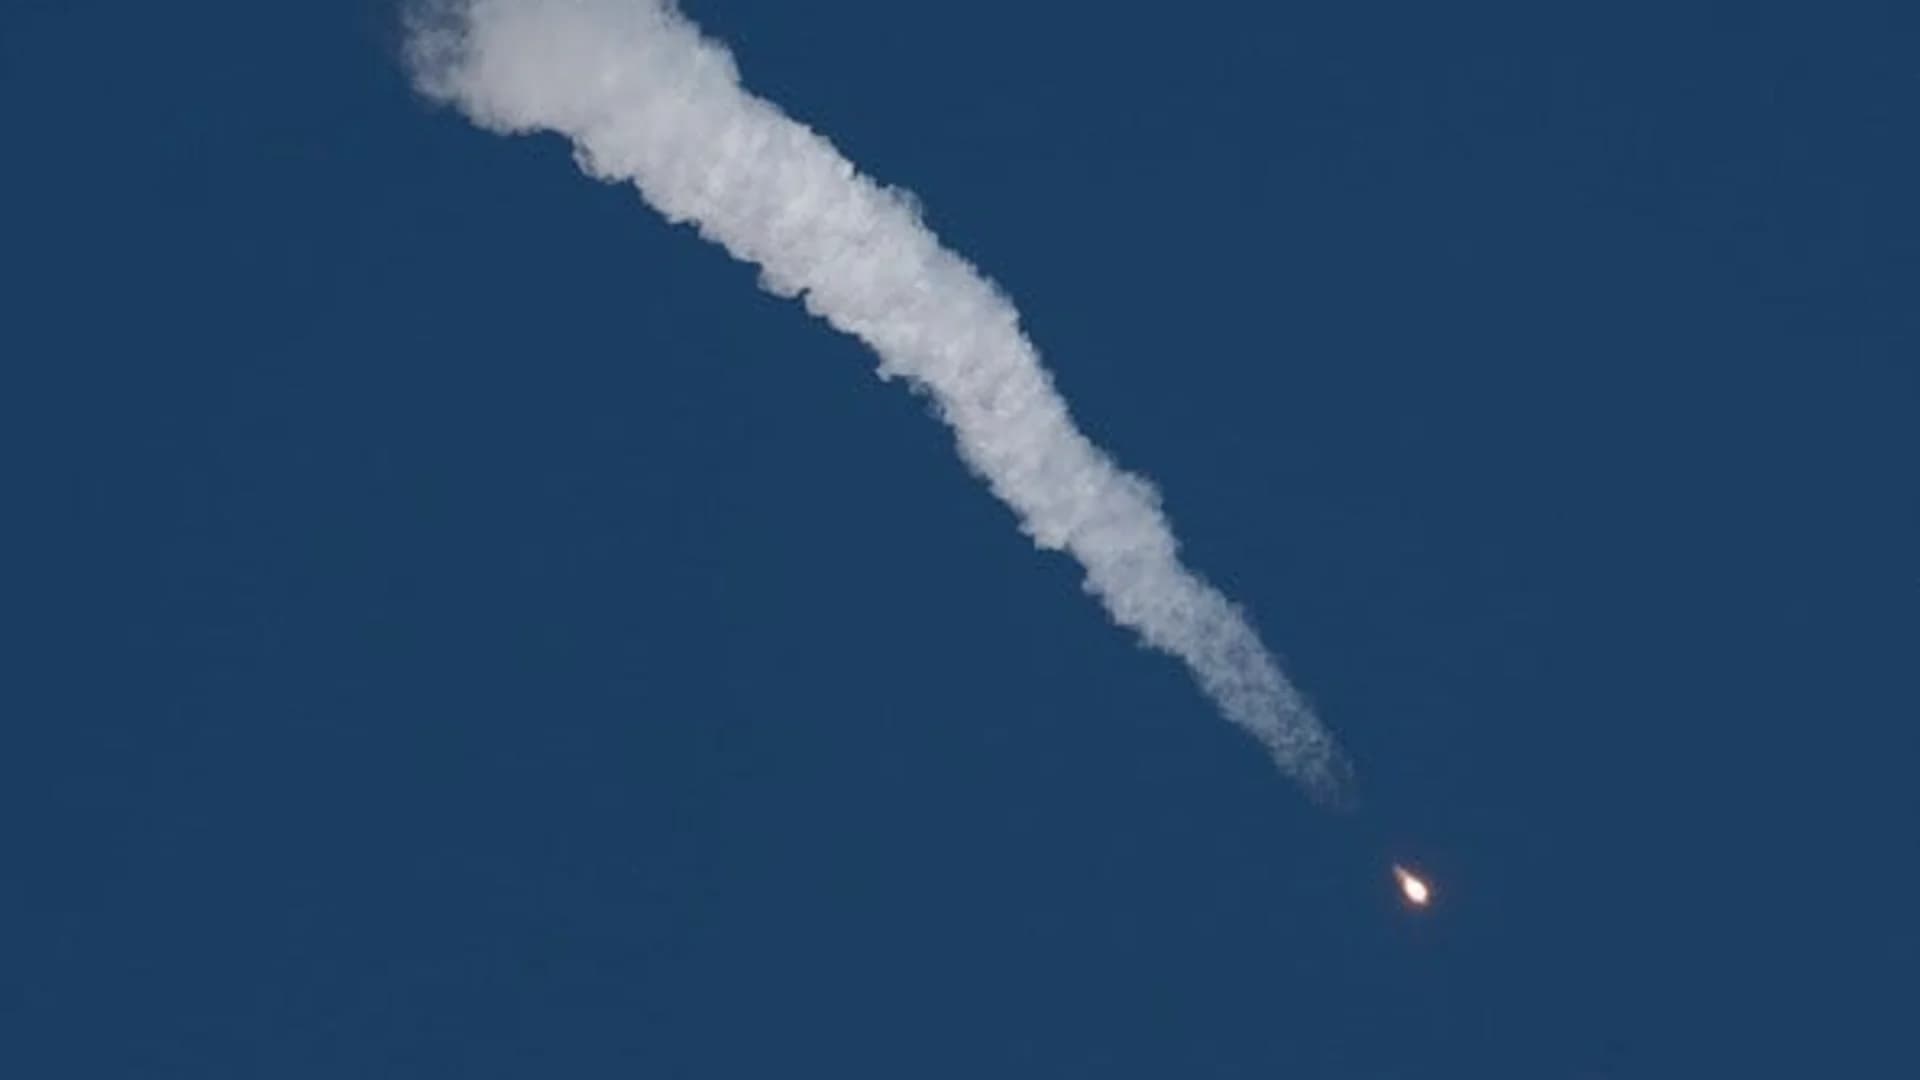 US, Russian astronauts safe after emergency landing